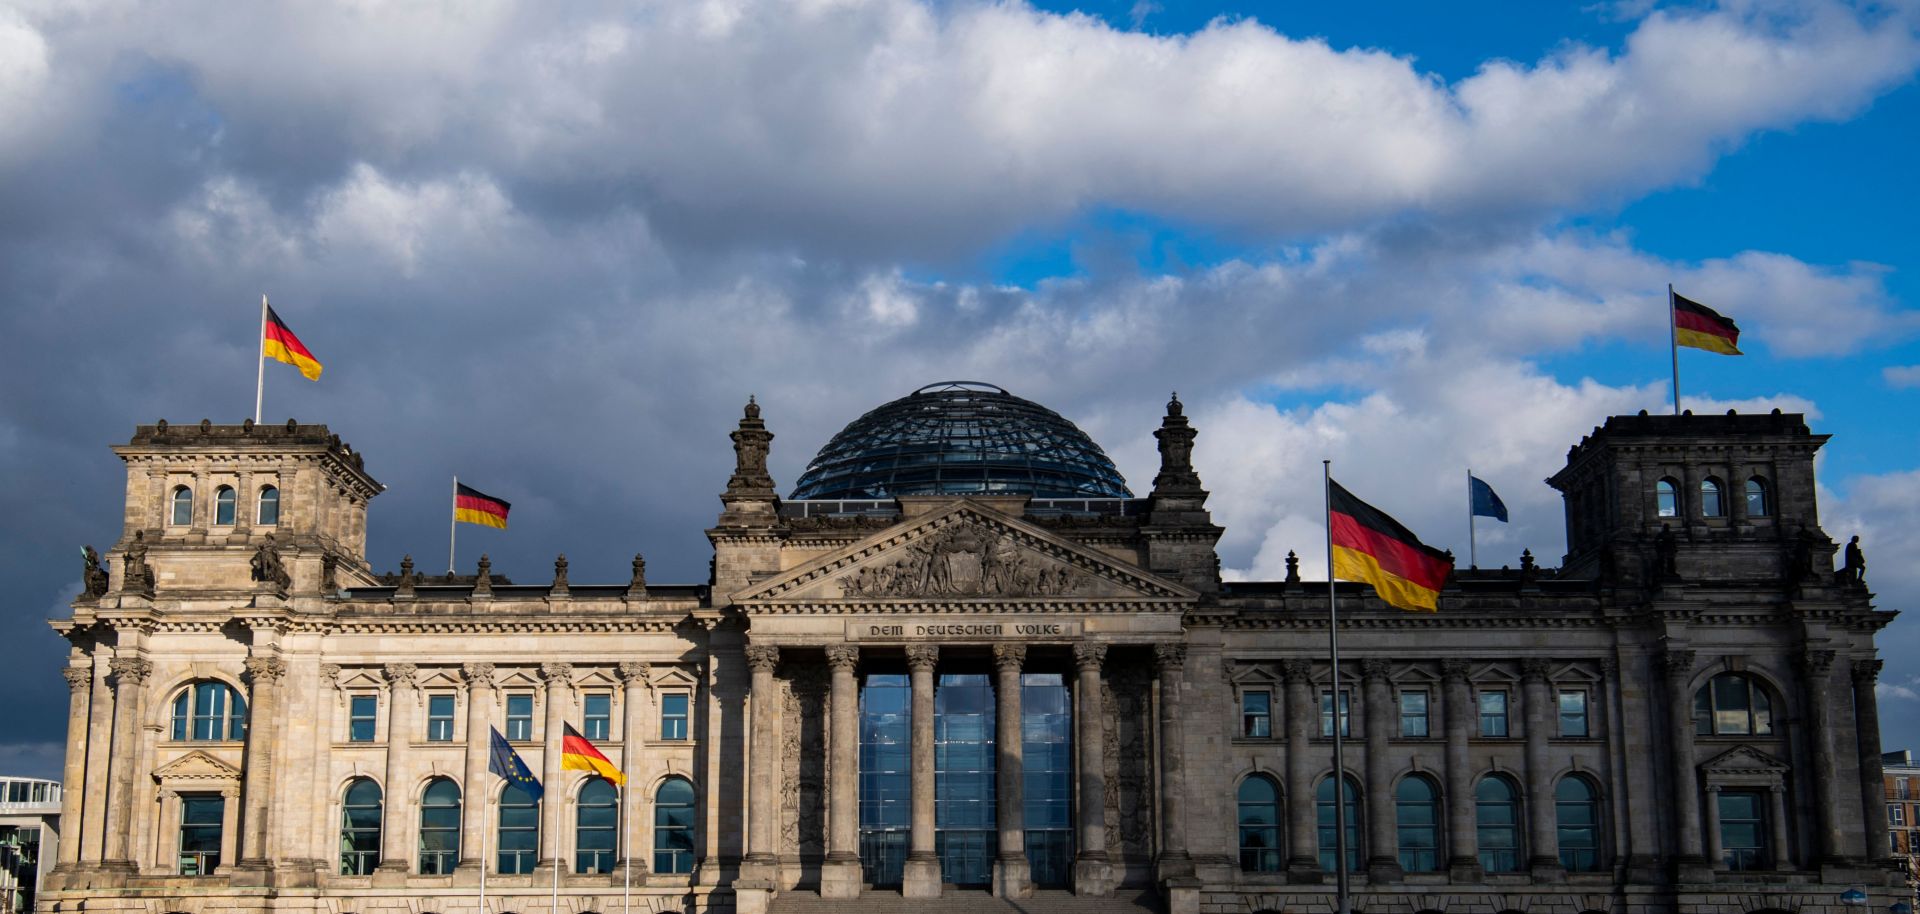 View of the Reichstag building which houses Germany's Bundestag (Lower House of parliament) in Berlin